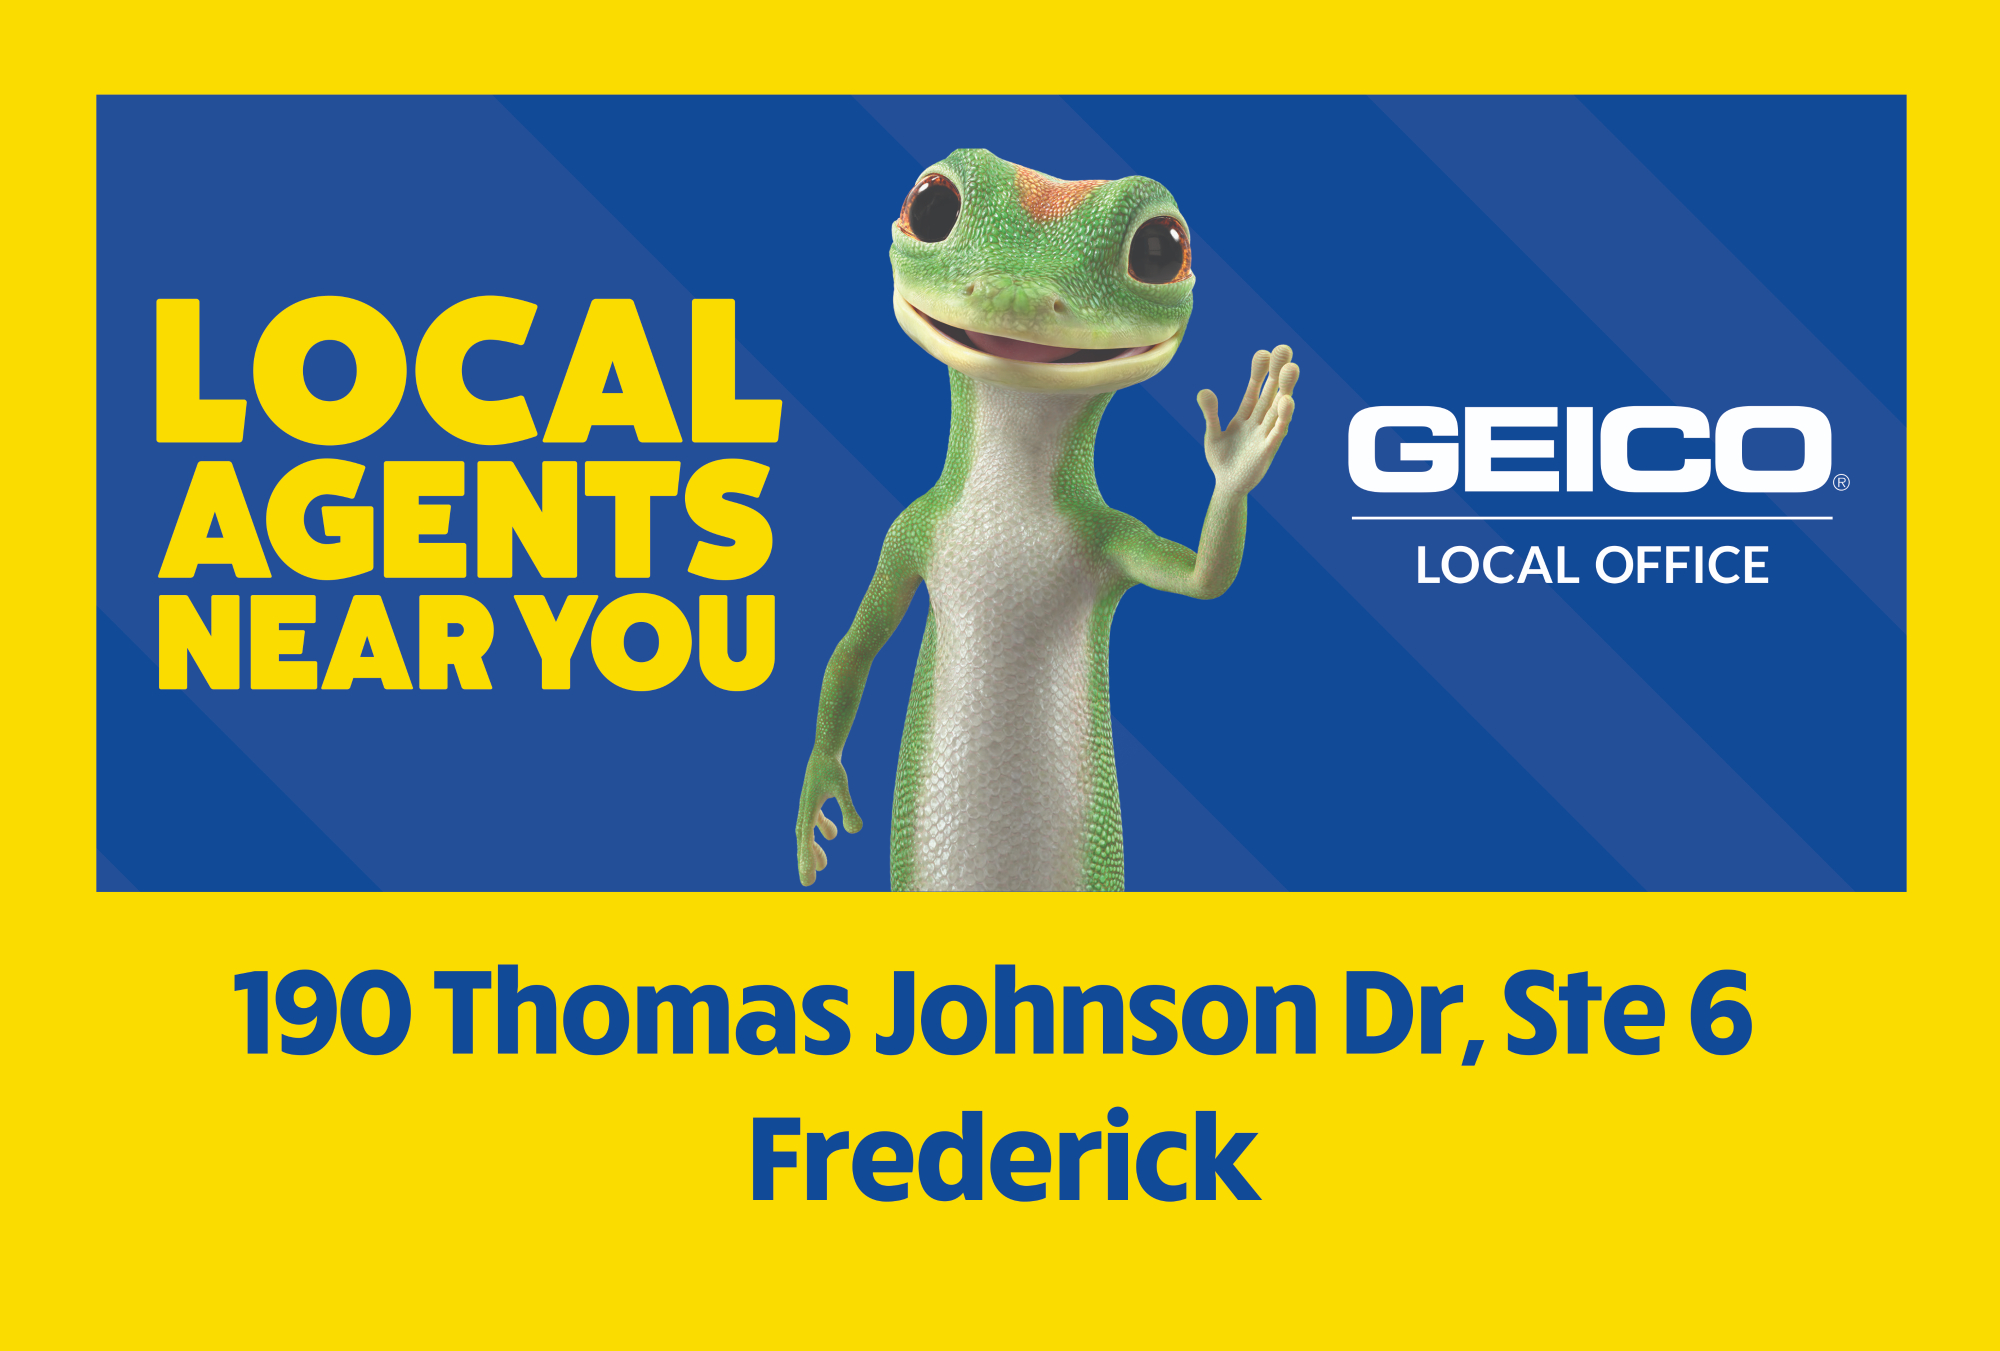 GEICO provides car insurance to millions of drivers across the United States. Visit your local GEICO office at 7425 Grove Rd., Frederick, MD 21704
